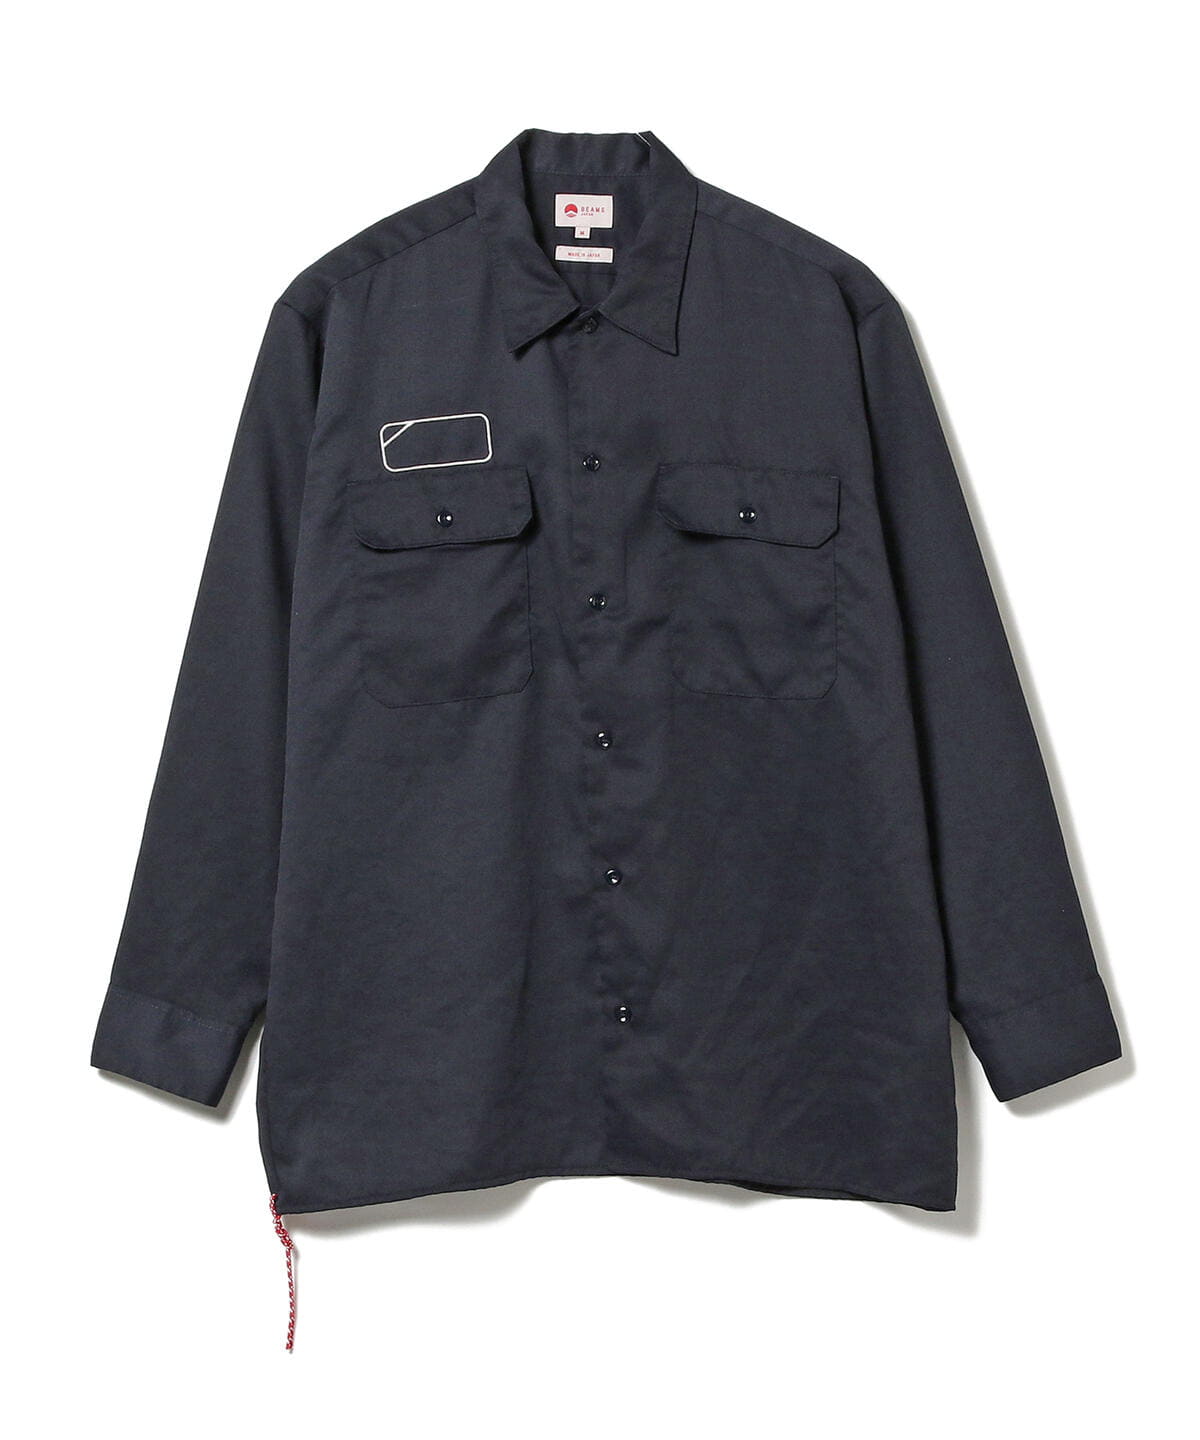 BEAMS JAPAN BEAMS JAPAN Outlet] BEAMS JAPAN / Loose fit work 